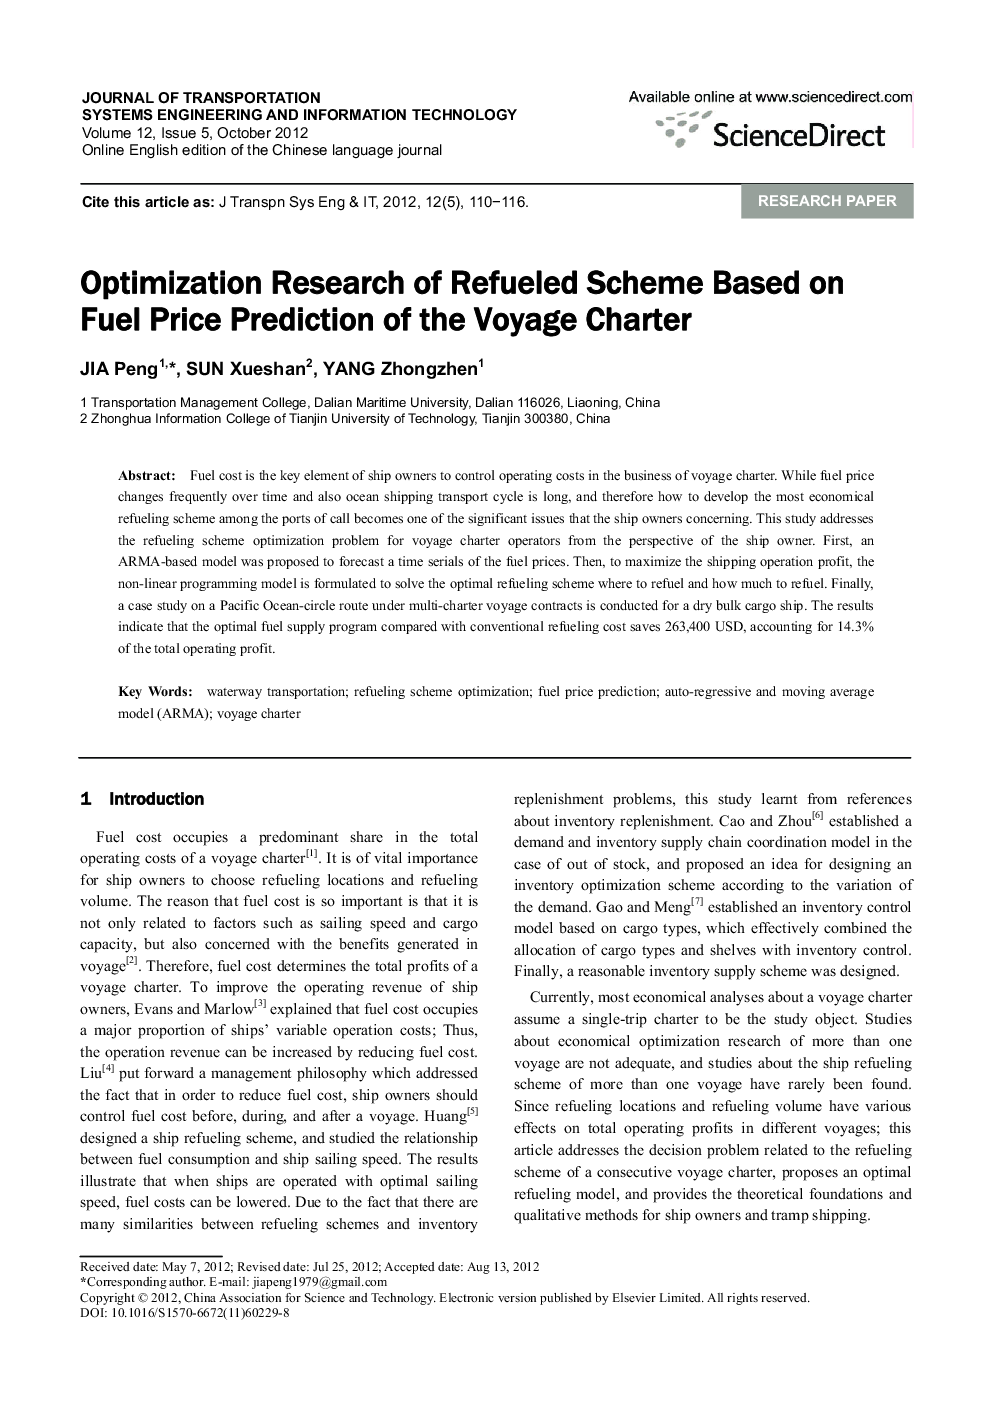 Optimization Research of Refueled Scheme Based on Fuel Price Prediction of the Voyage Charter